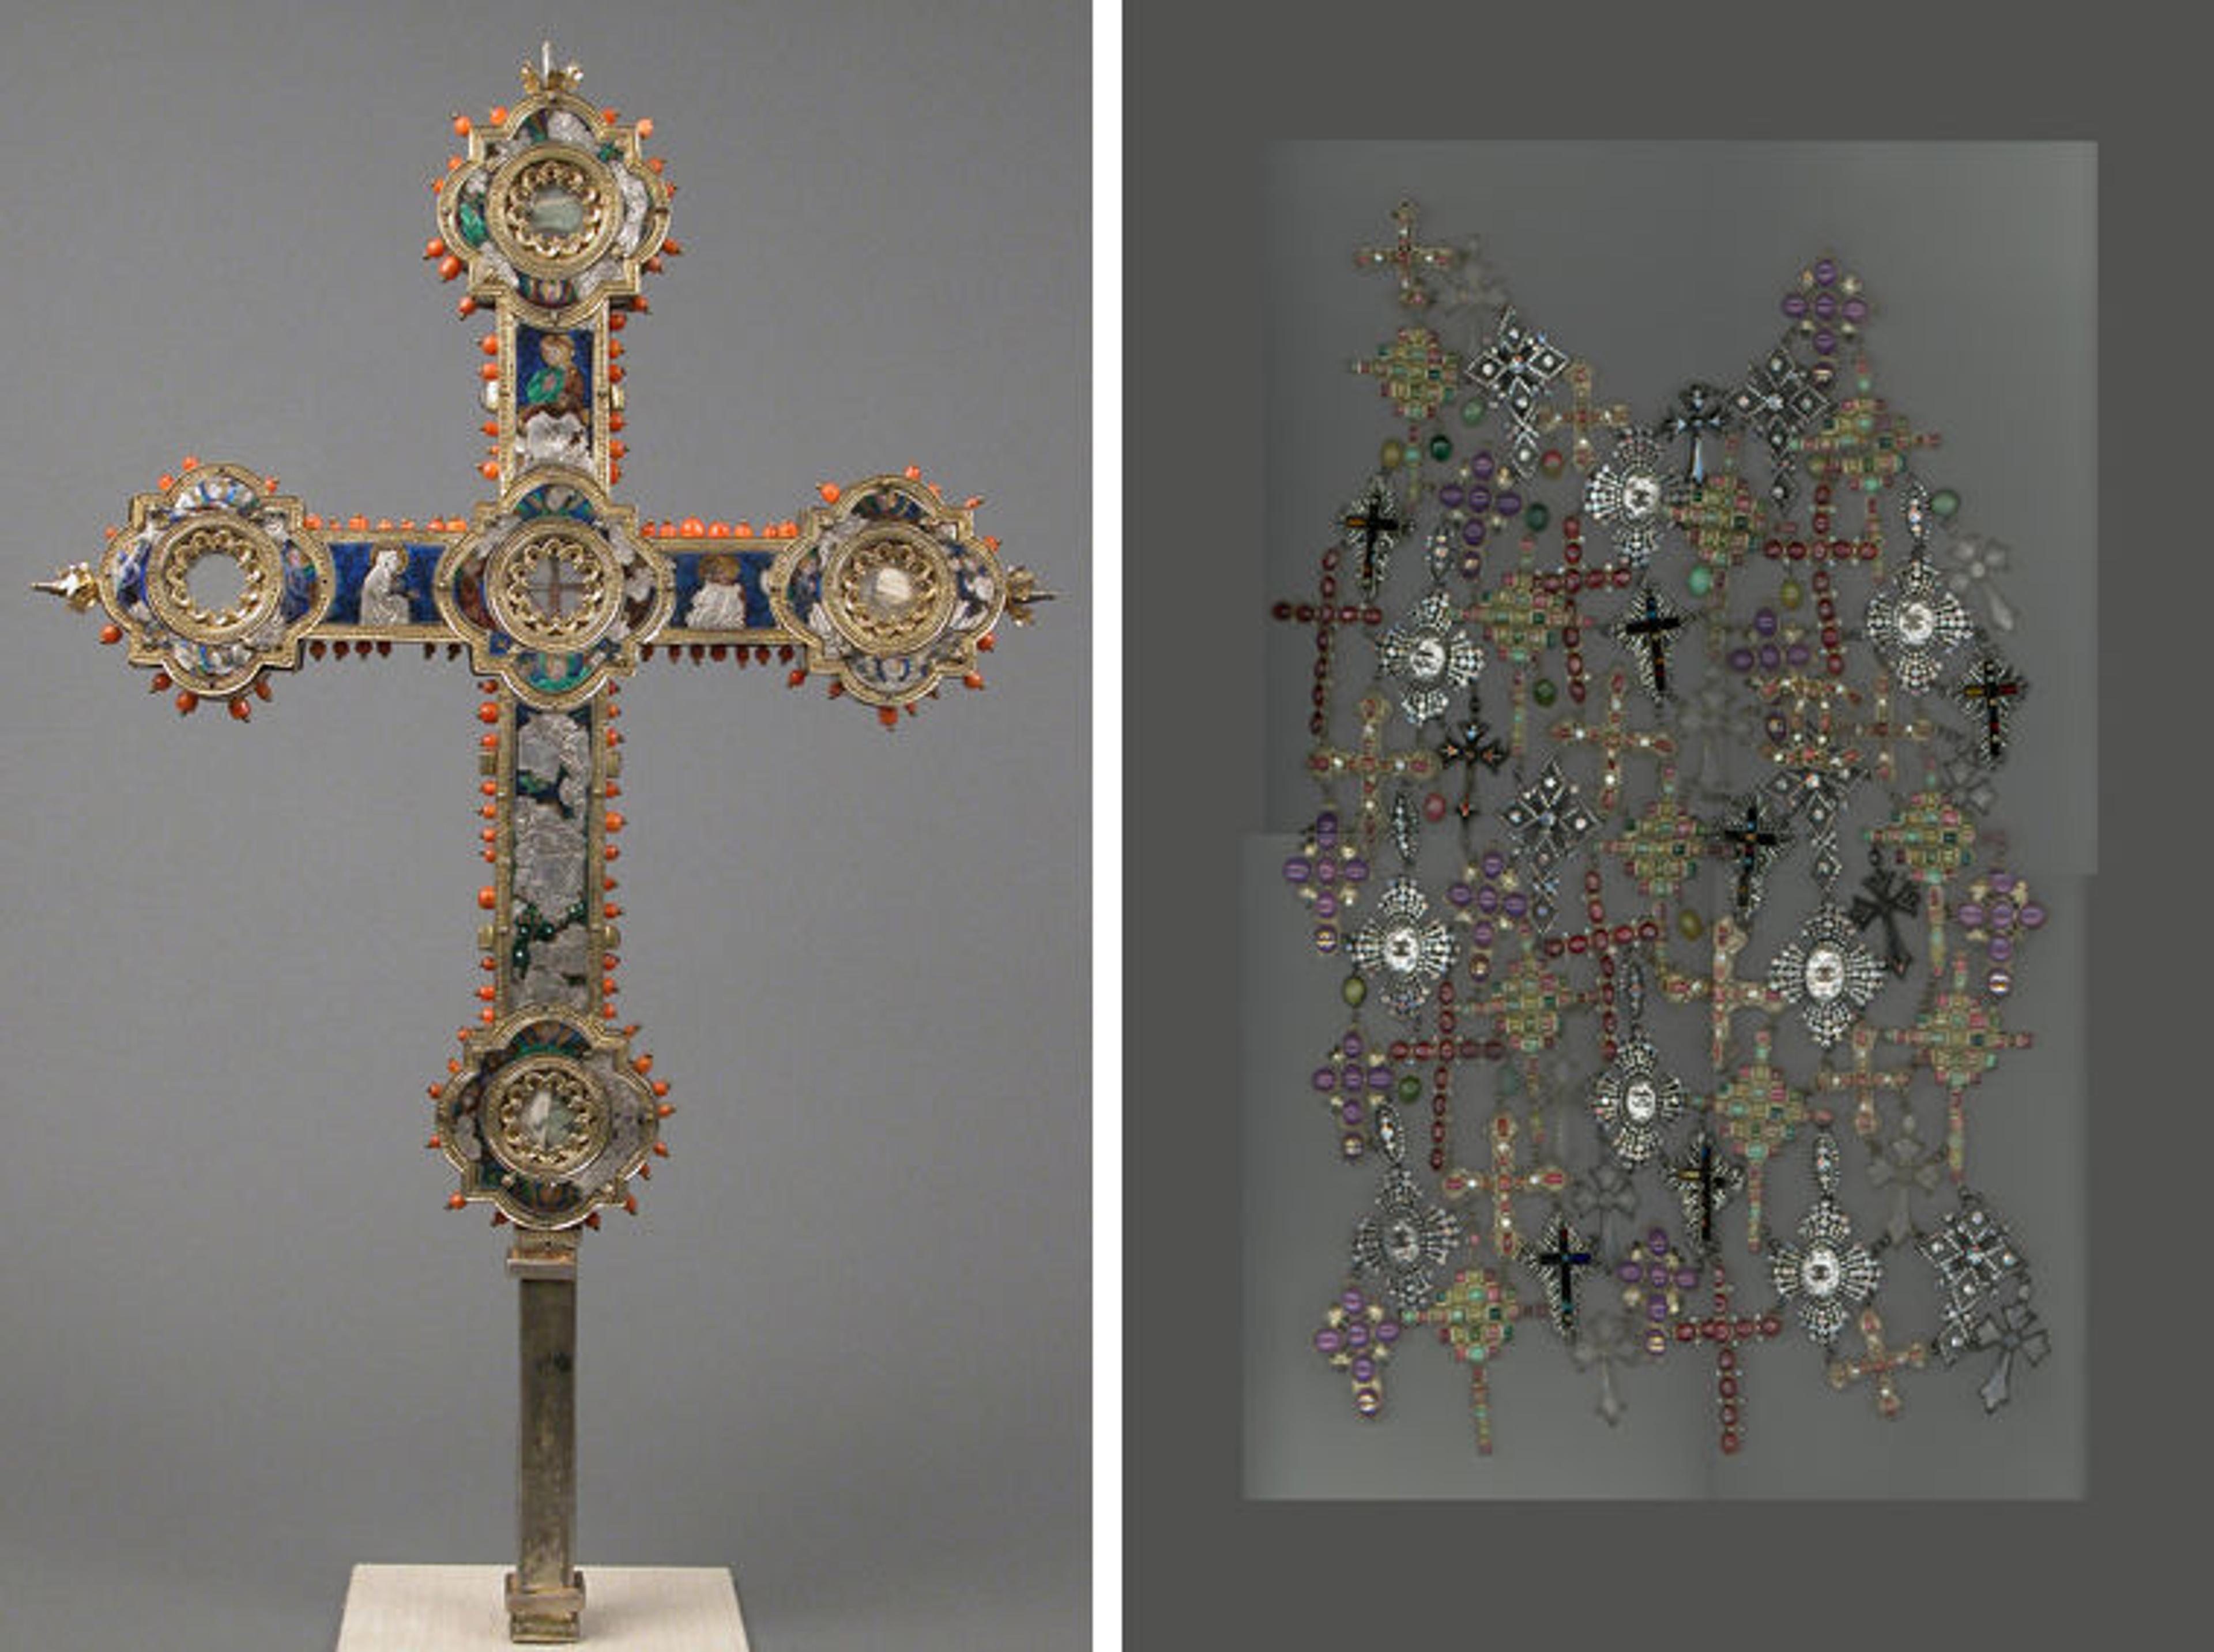 A Renaissance Italian reliquary cross at left, and a Karl Lagerfeld gilet composed of intricate cross designs at right